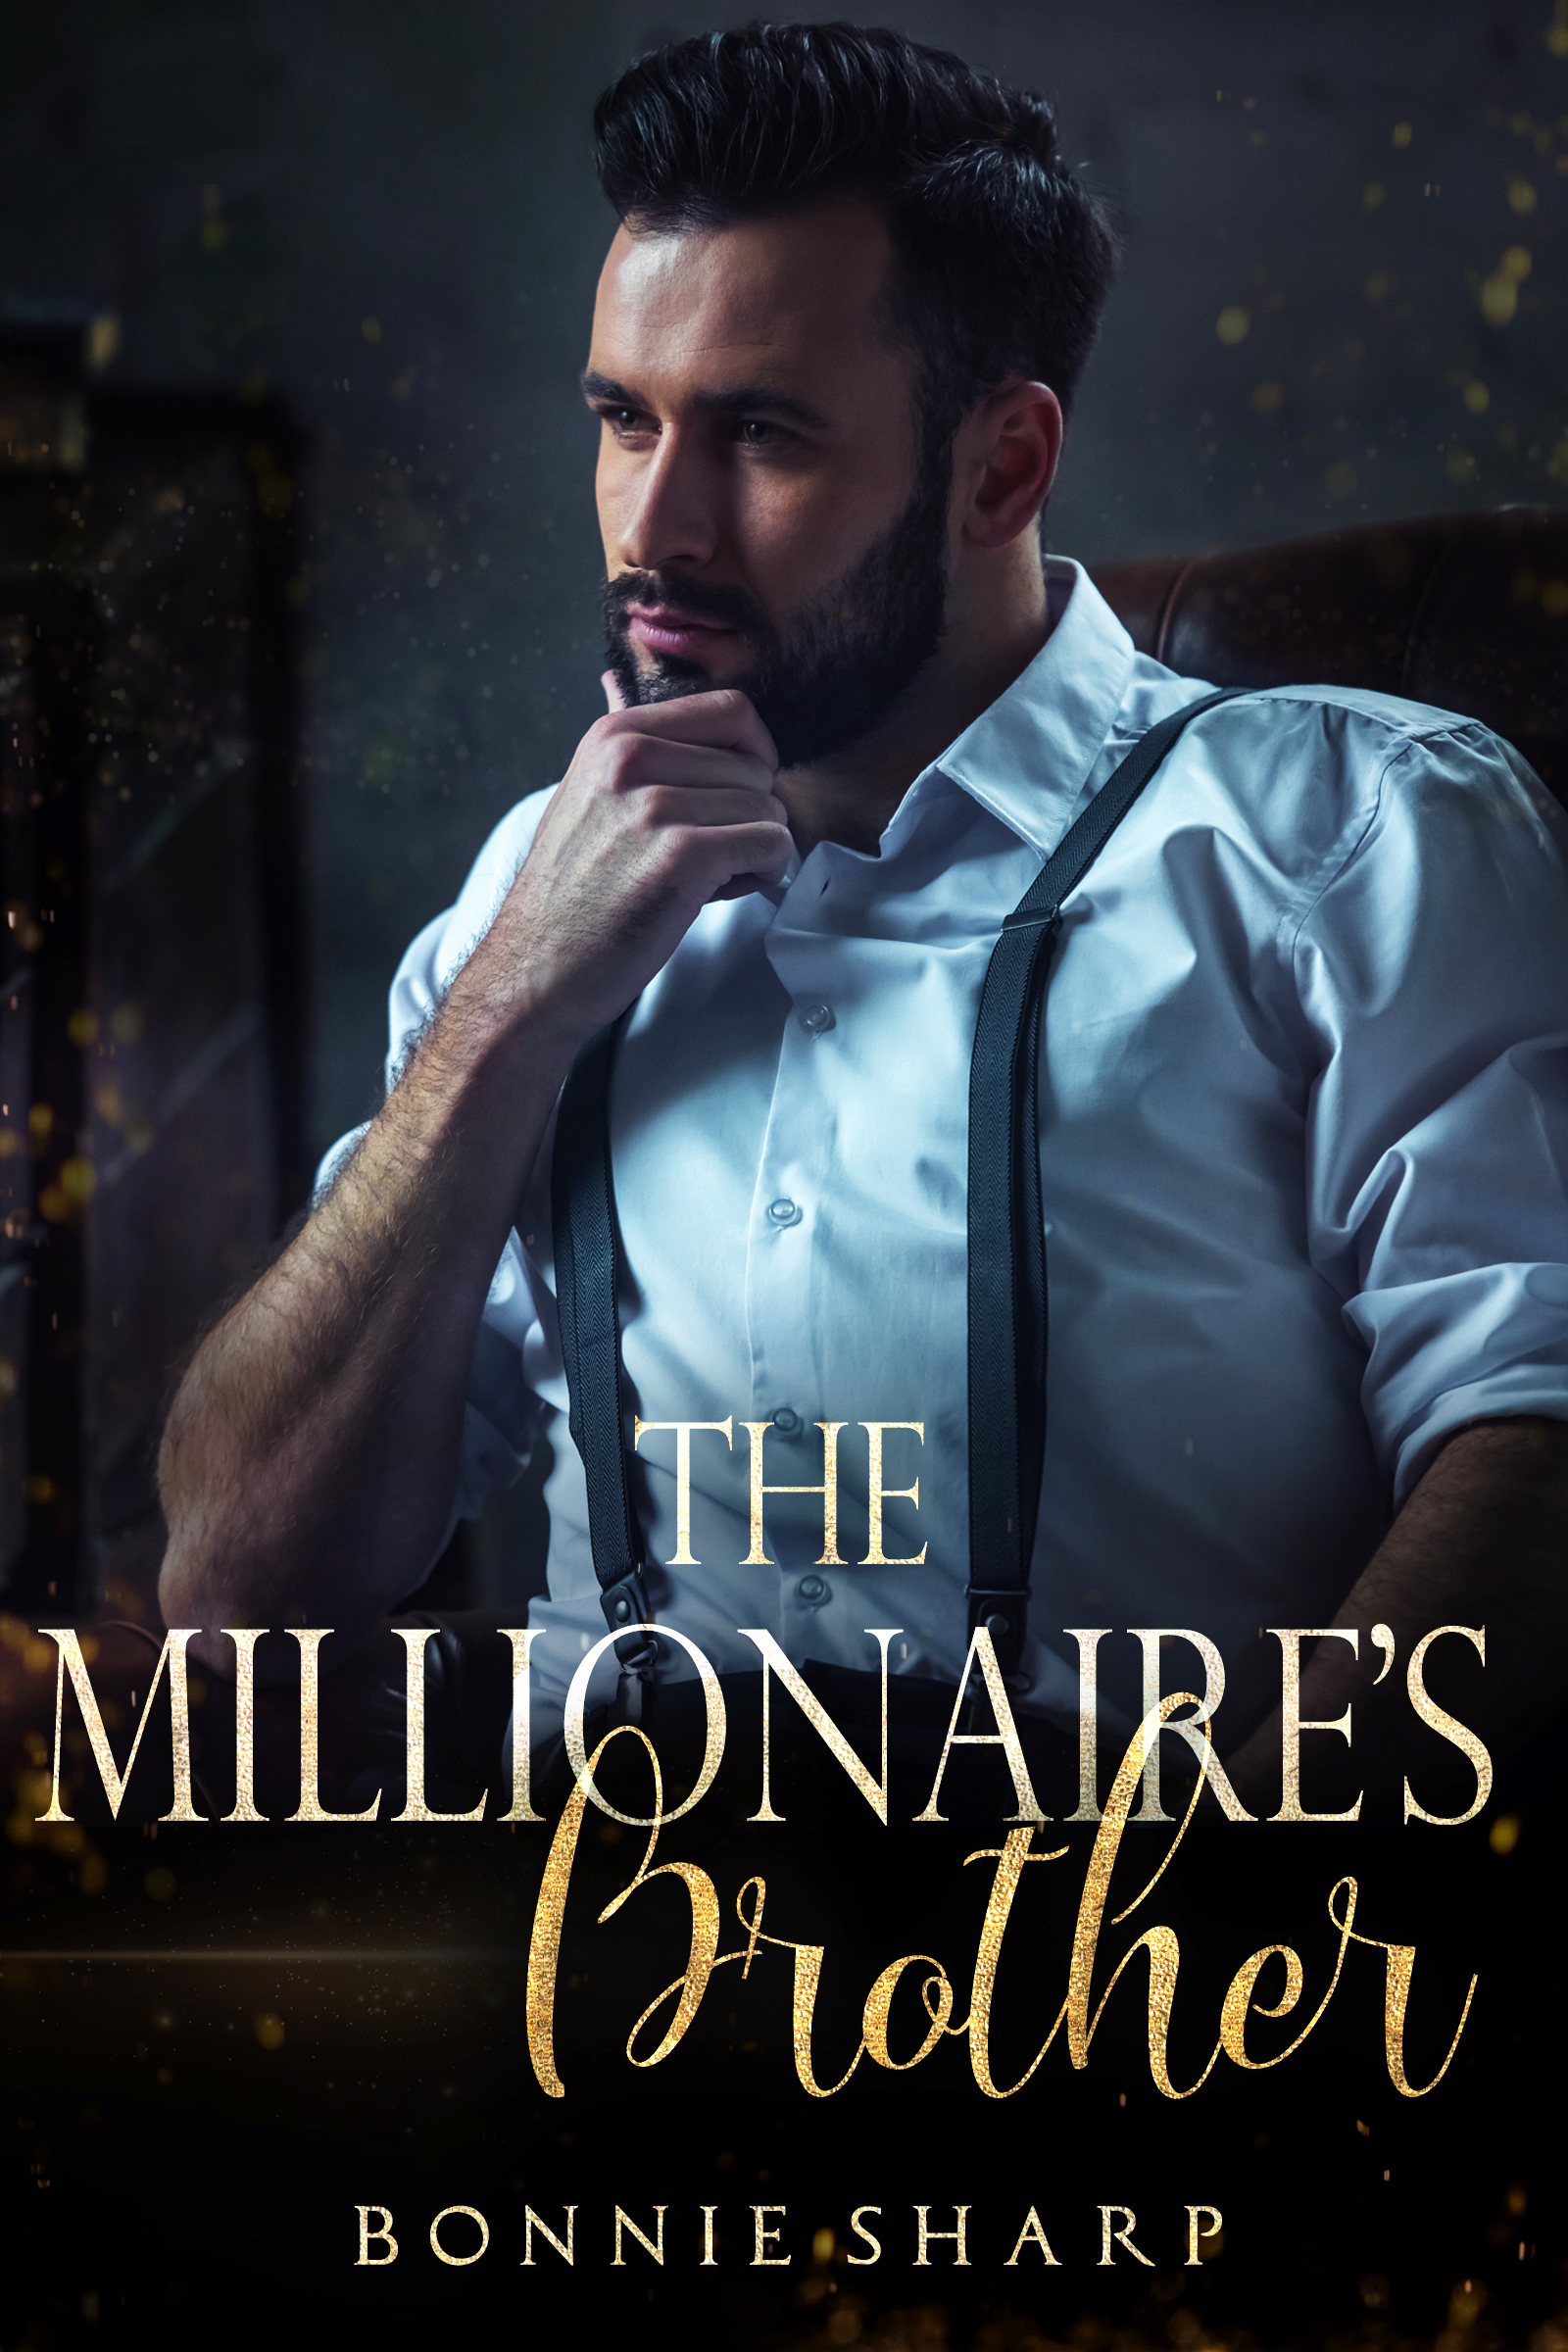 The Millionaire’s Brother